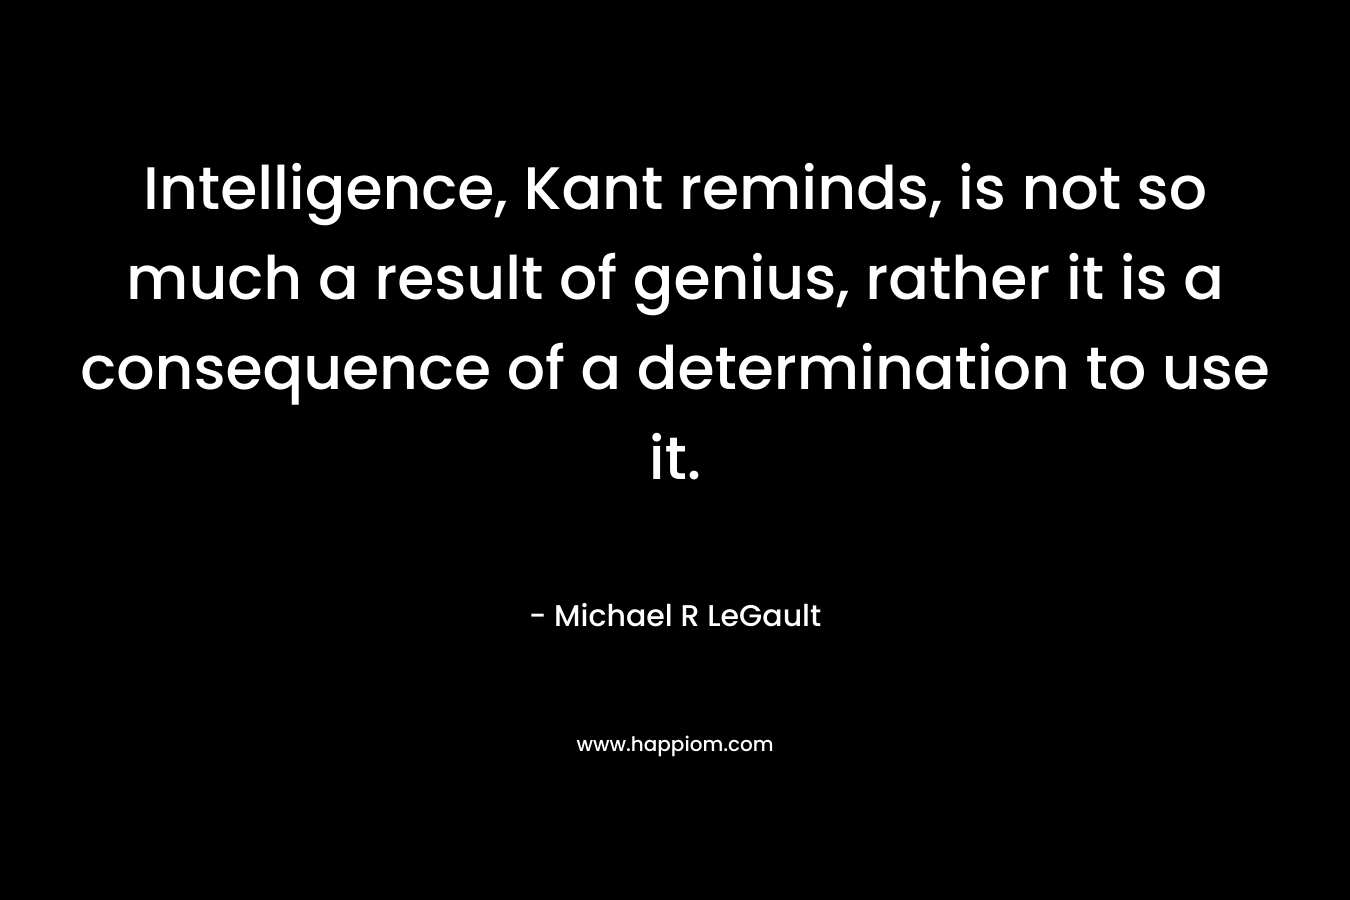 Intelligence, Kant reminds, is not so much a result of genius, rather it is a consequence of a determination to use it.